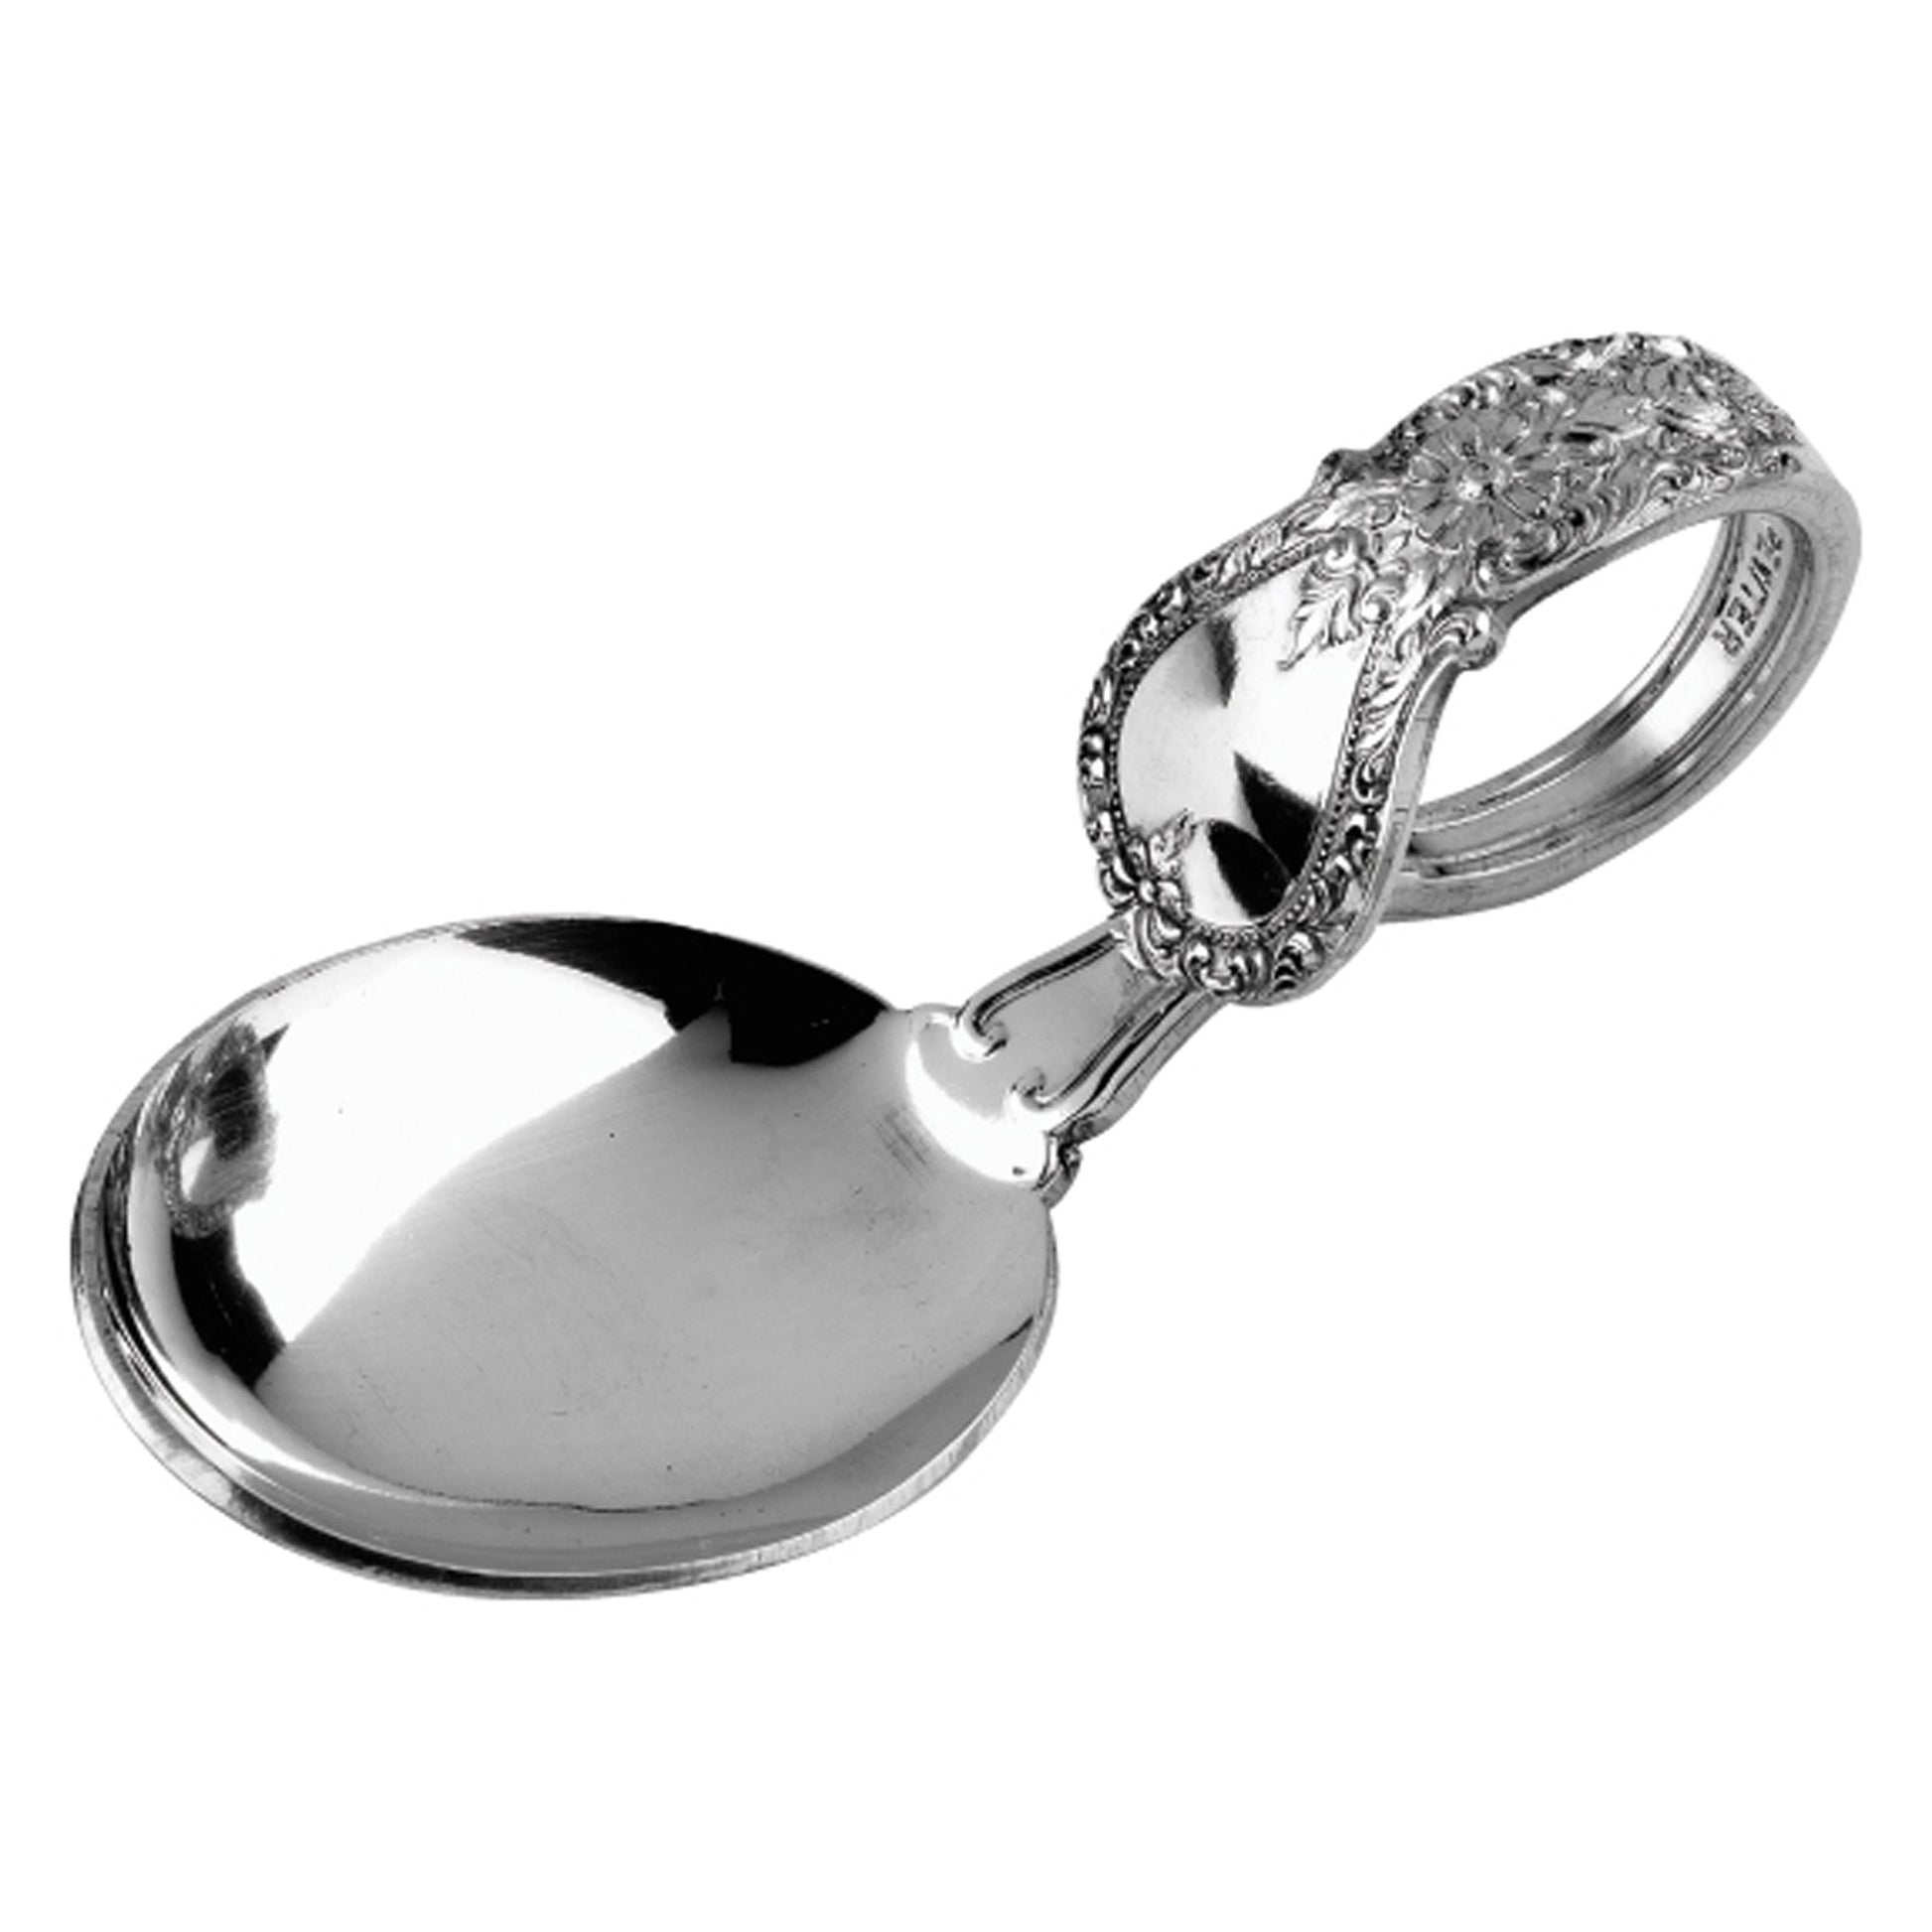 Silver Bent Baby Spoon